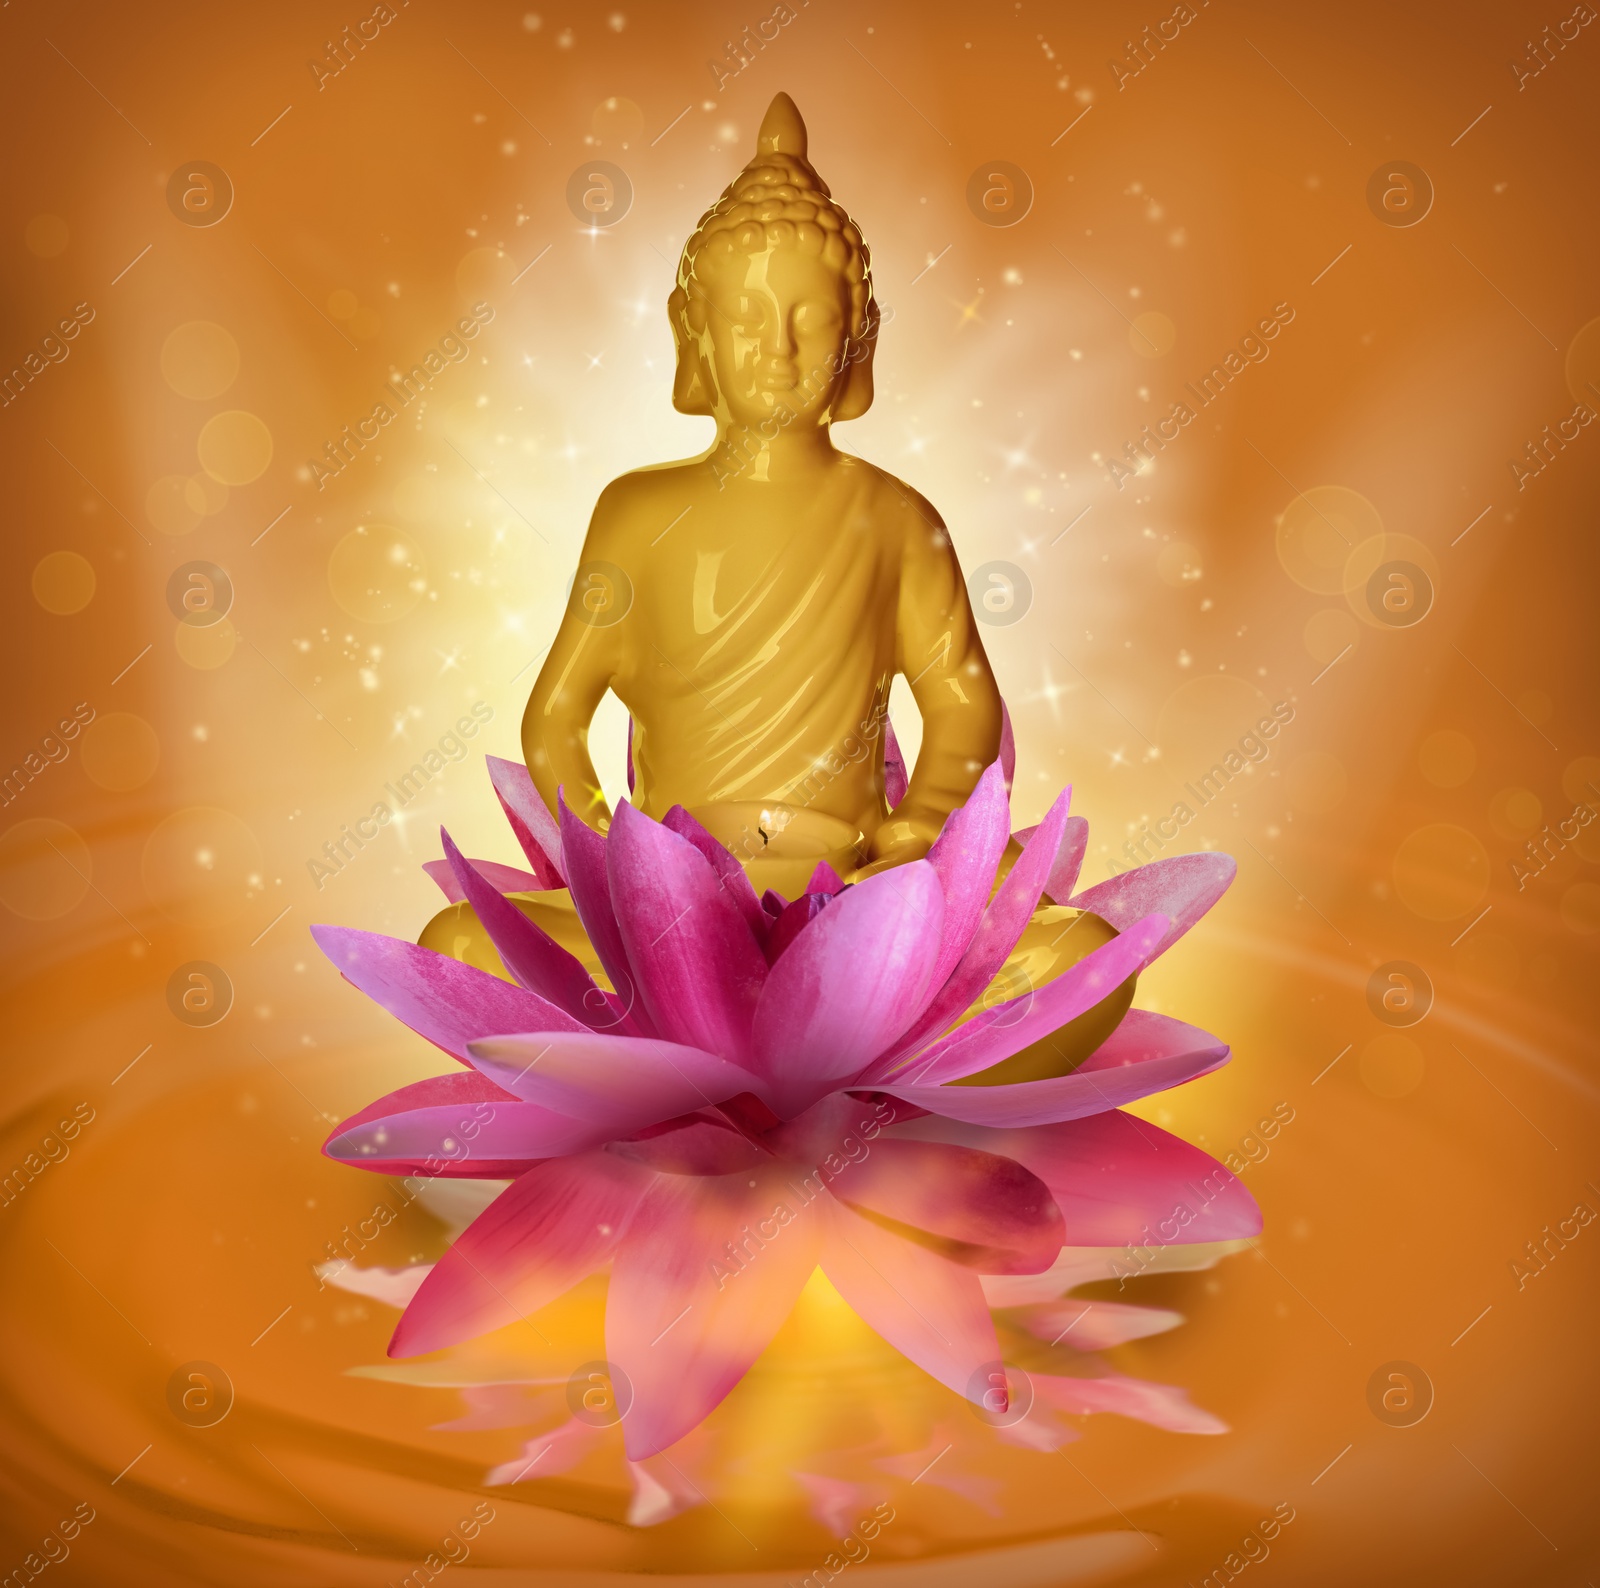 Image of Beautiful composition with Buddha sculpture and lotus flower on water surface